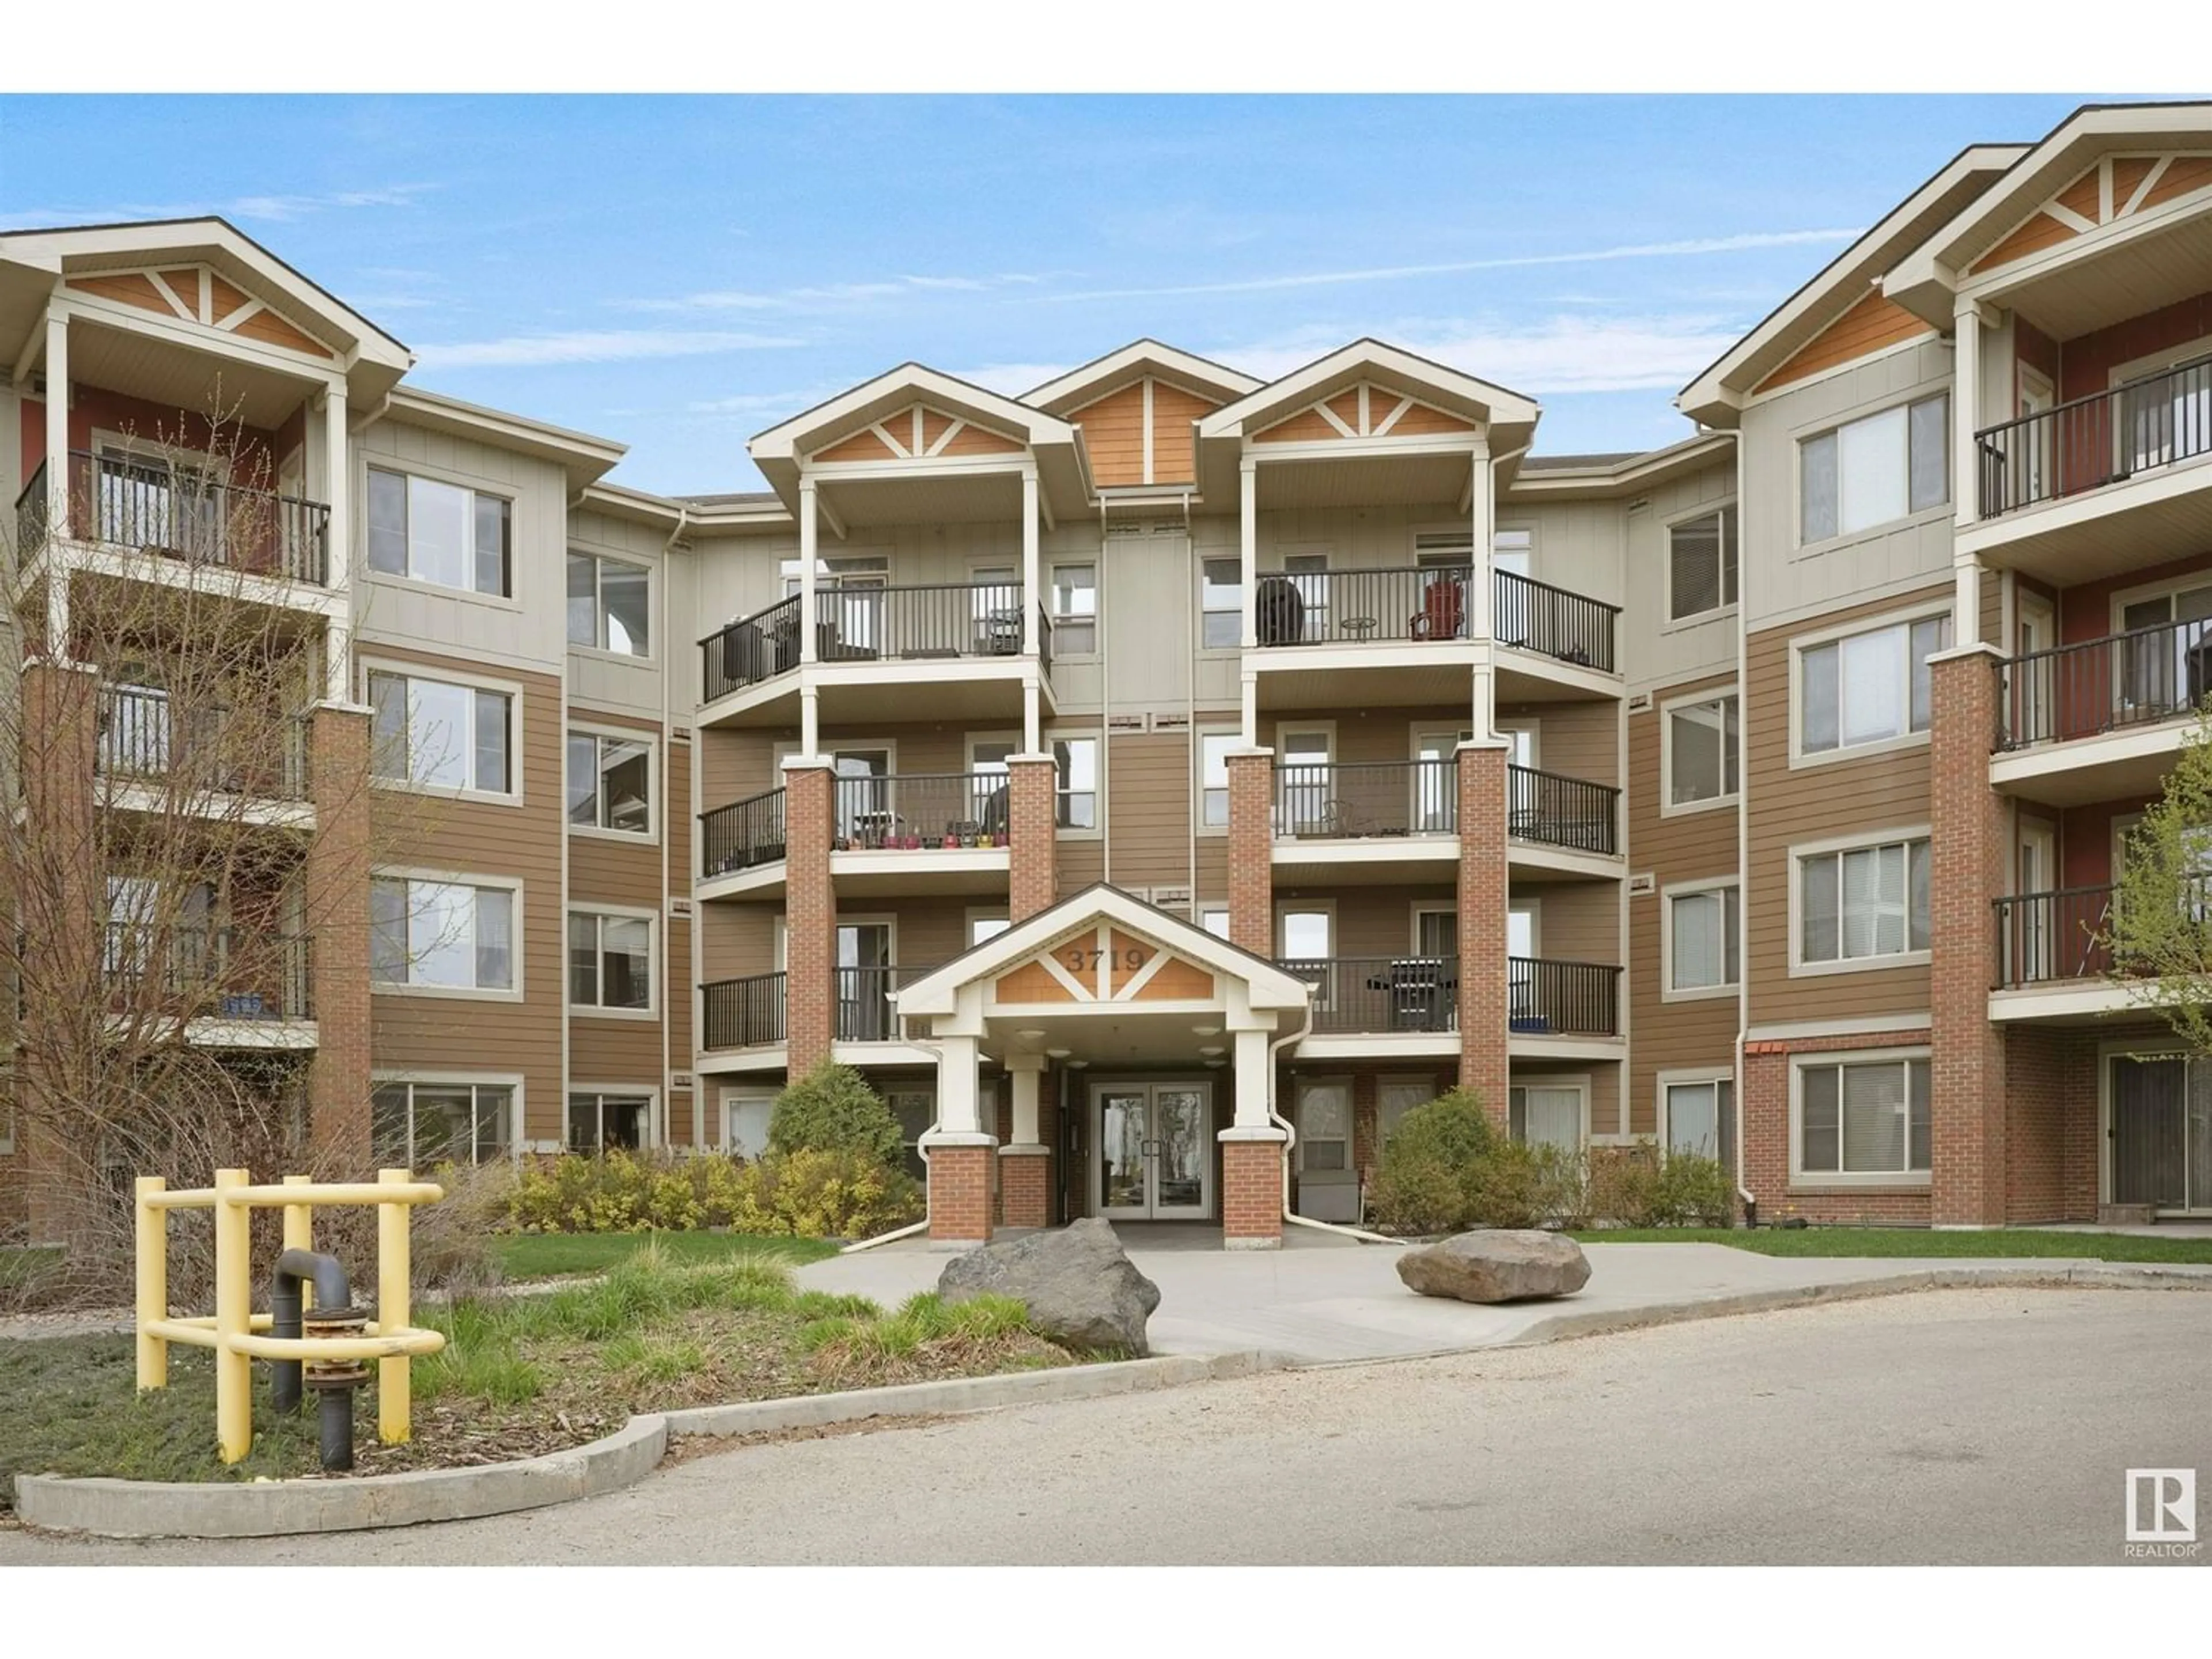 A pic from exterior of the house or condo for #410 3719 WHITELAW LN NW, Edmonton Alberta T6W2C3